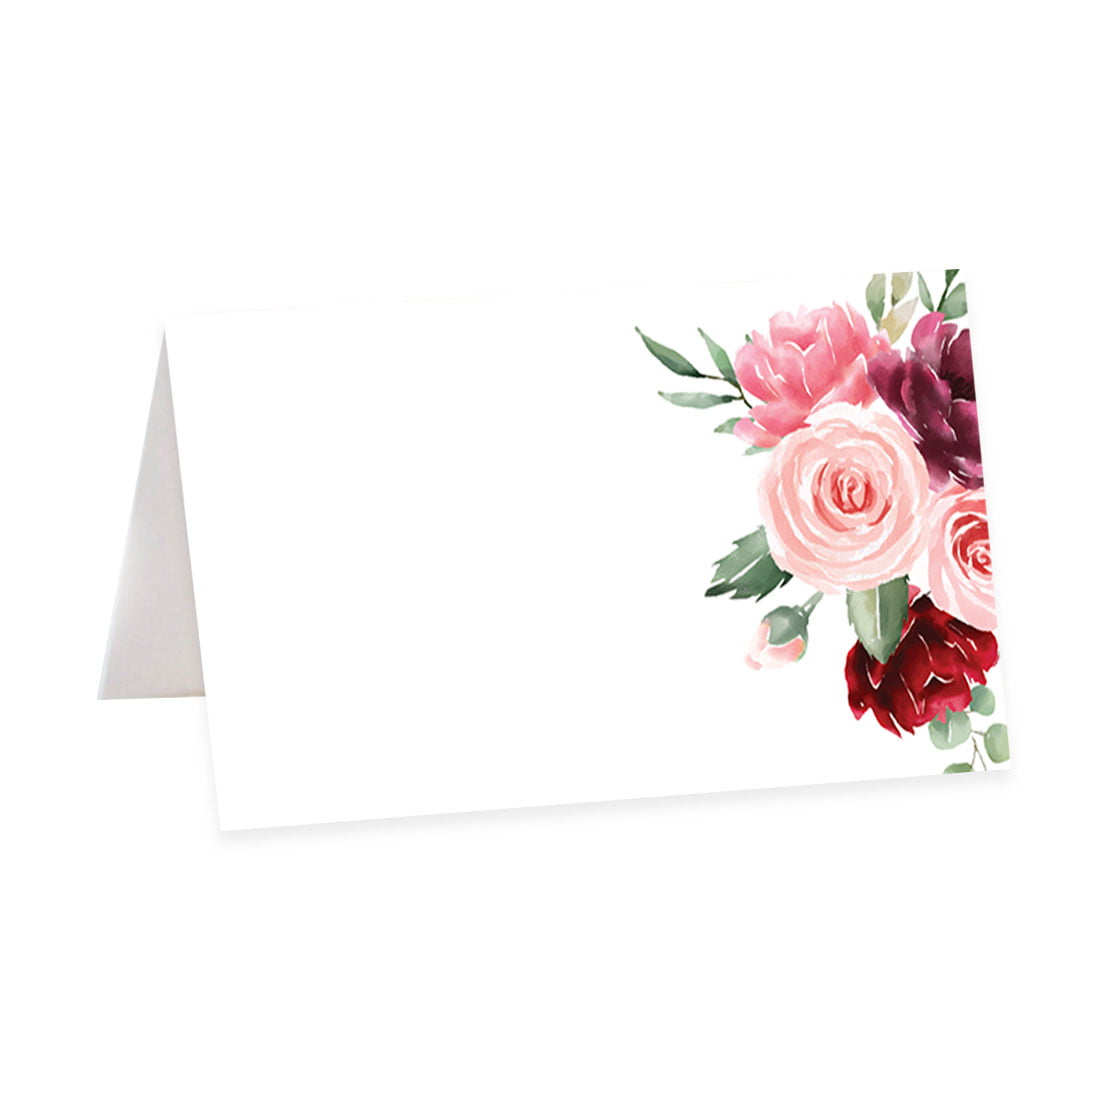 Rustic Vintage Watercolour Peach Floral Wedding Table Seating Name Place Cards 